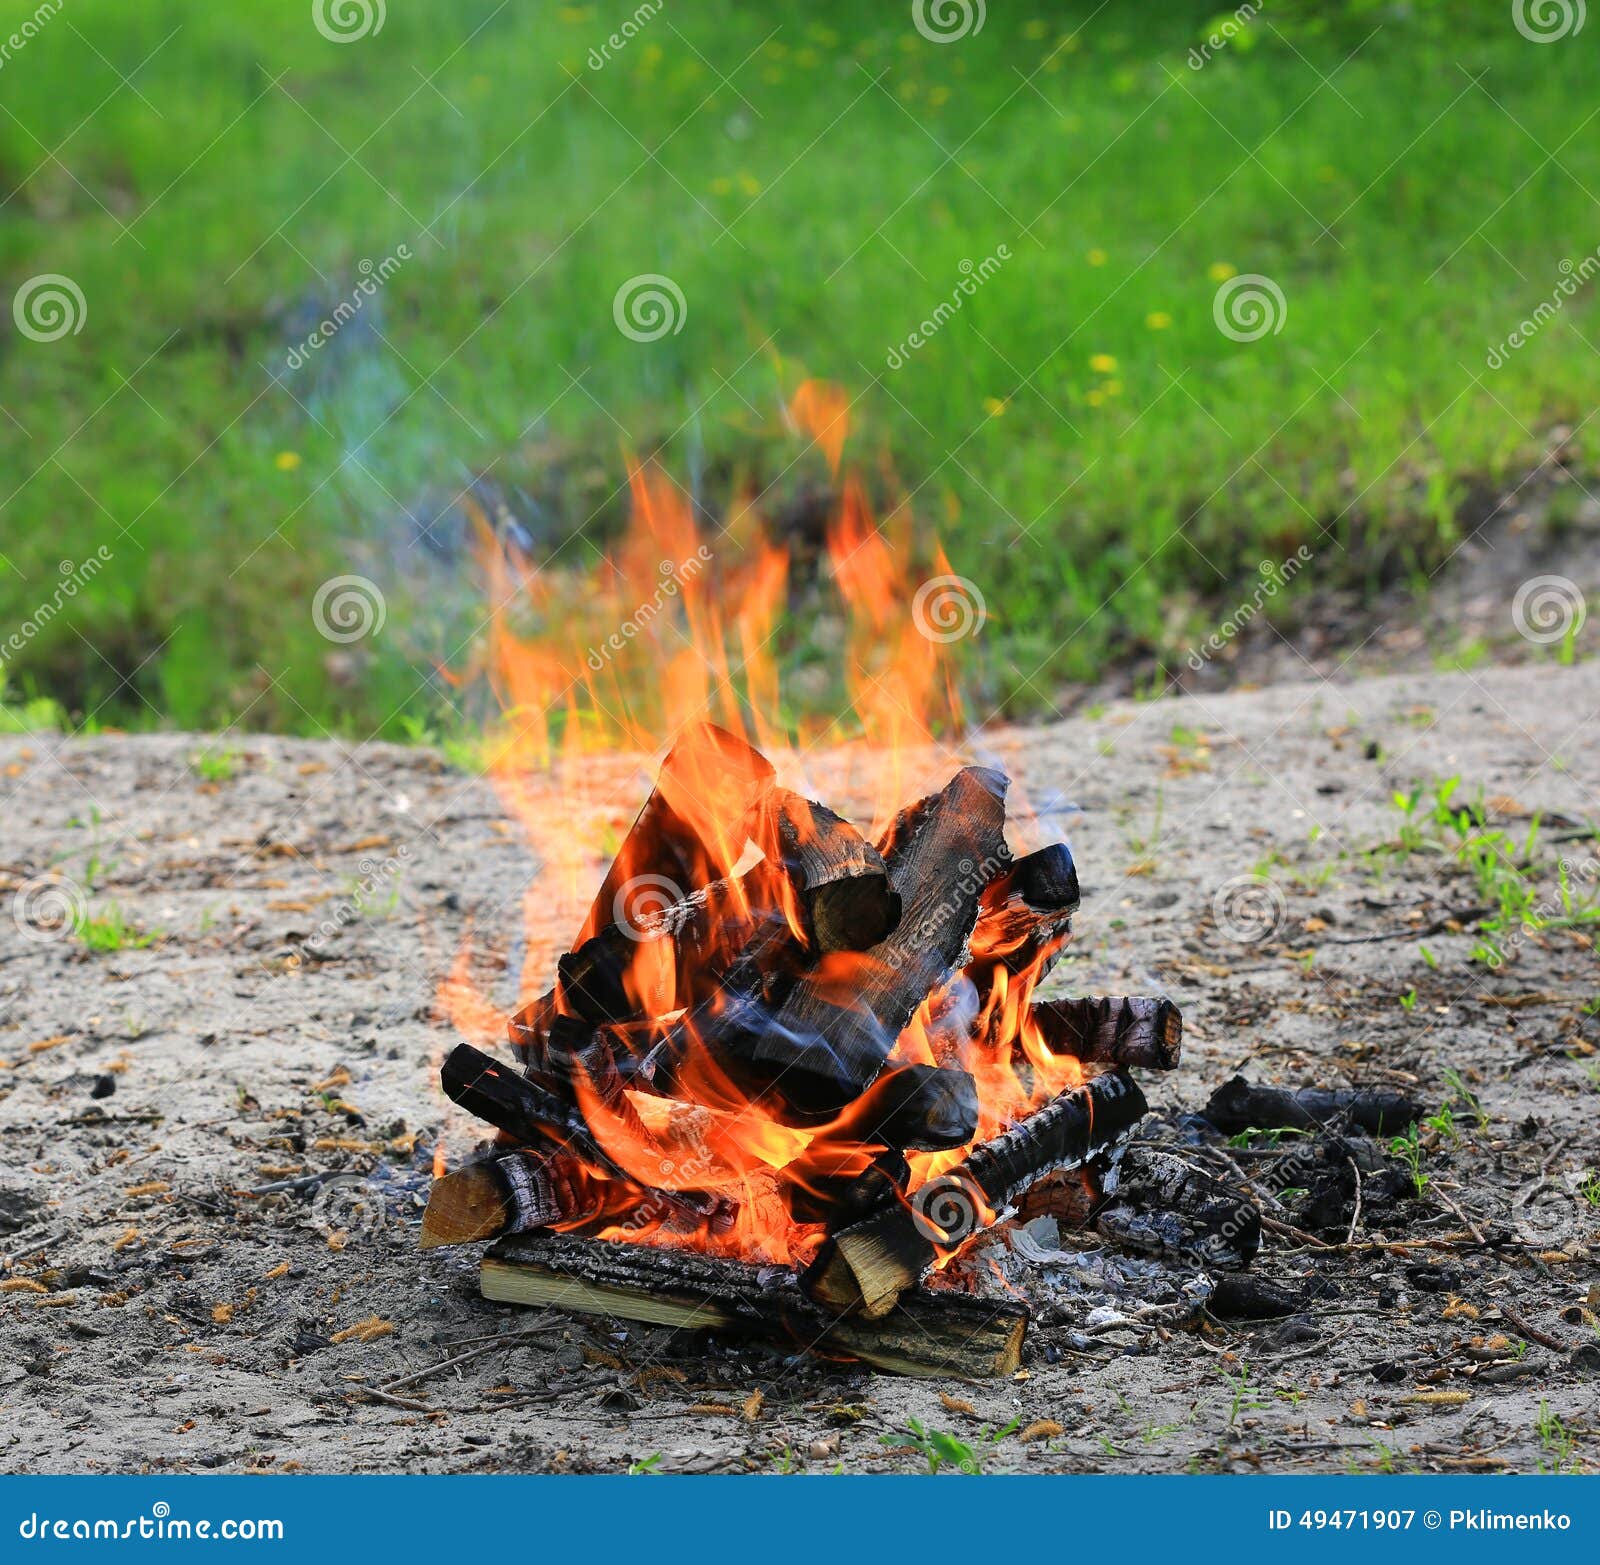 Hot flame of campfire stock image. Image of coal, glow - 49471907